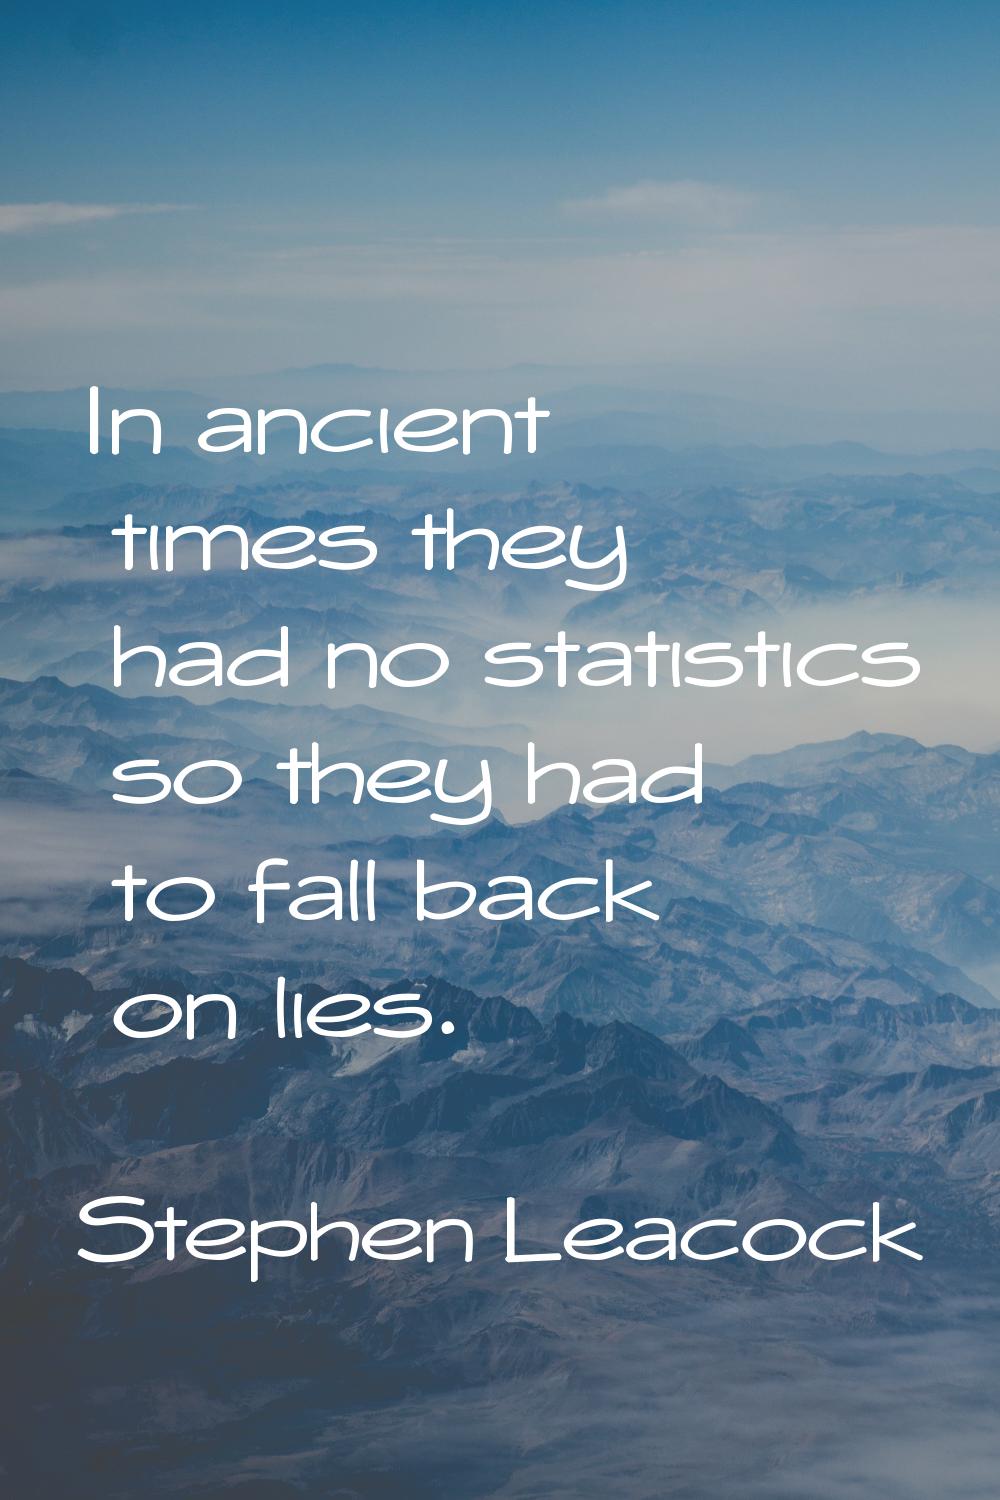 In ancient times they had no statistics so they had to fall back on lies.